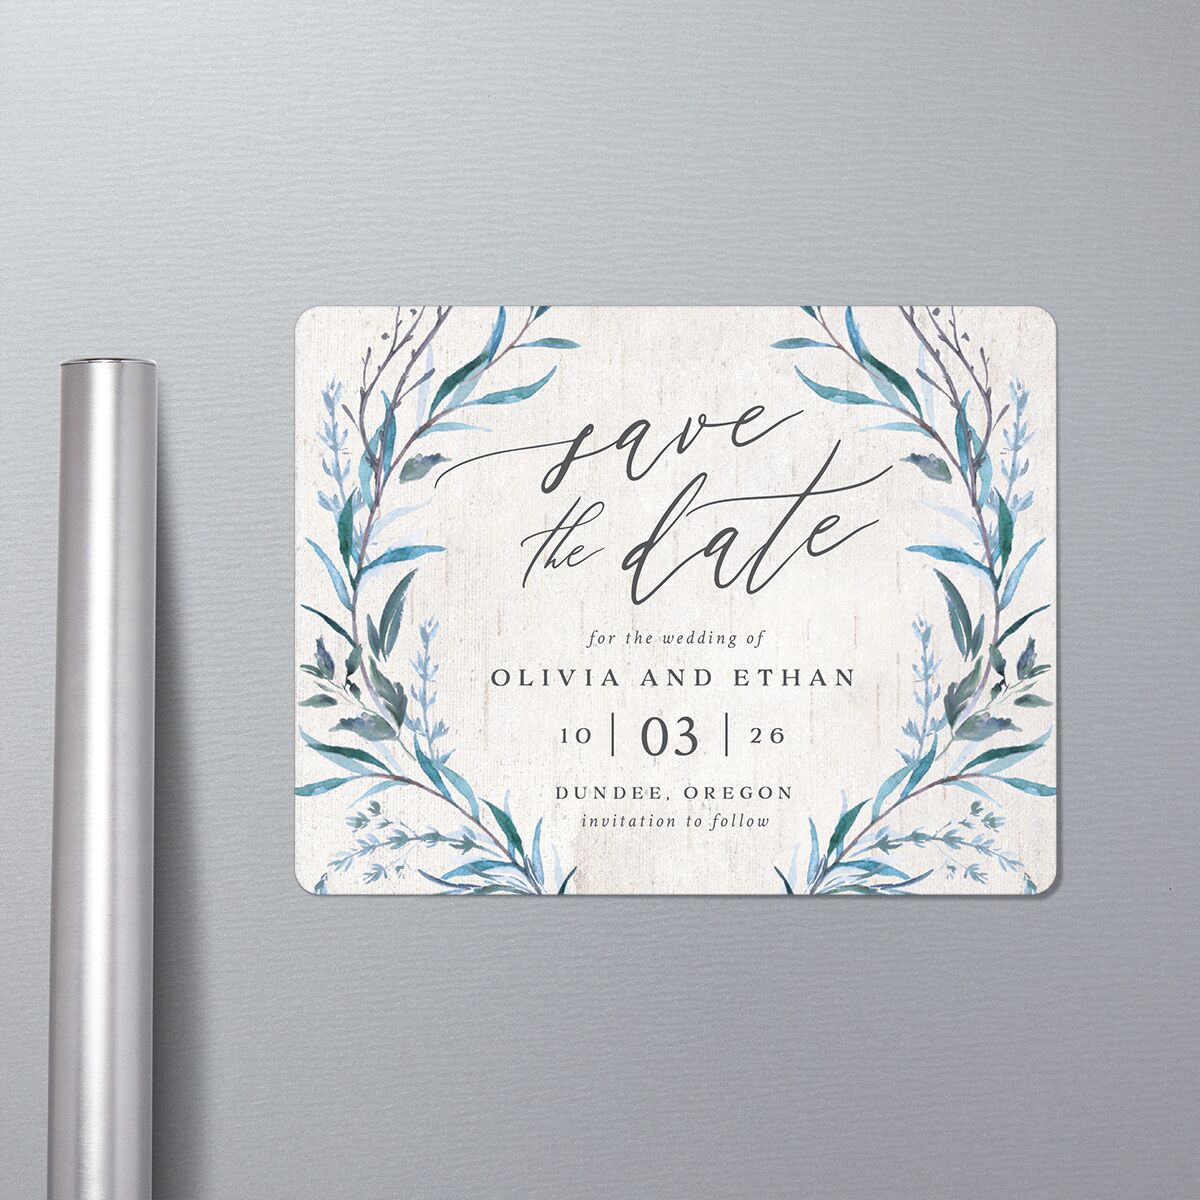 Natural Laurel Save The Date Magnets in-situ in Blue